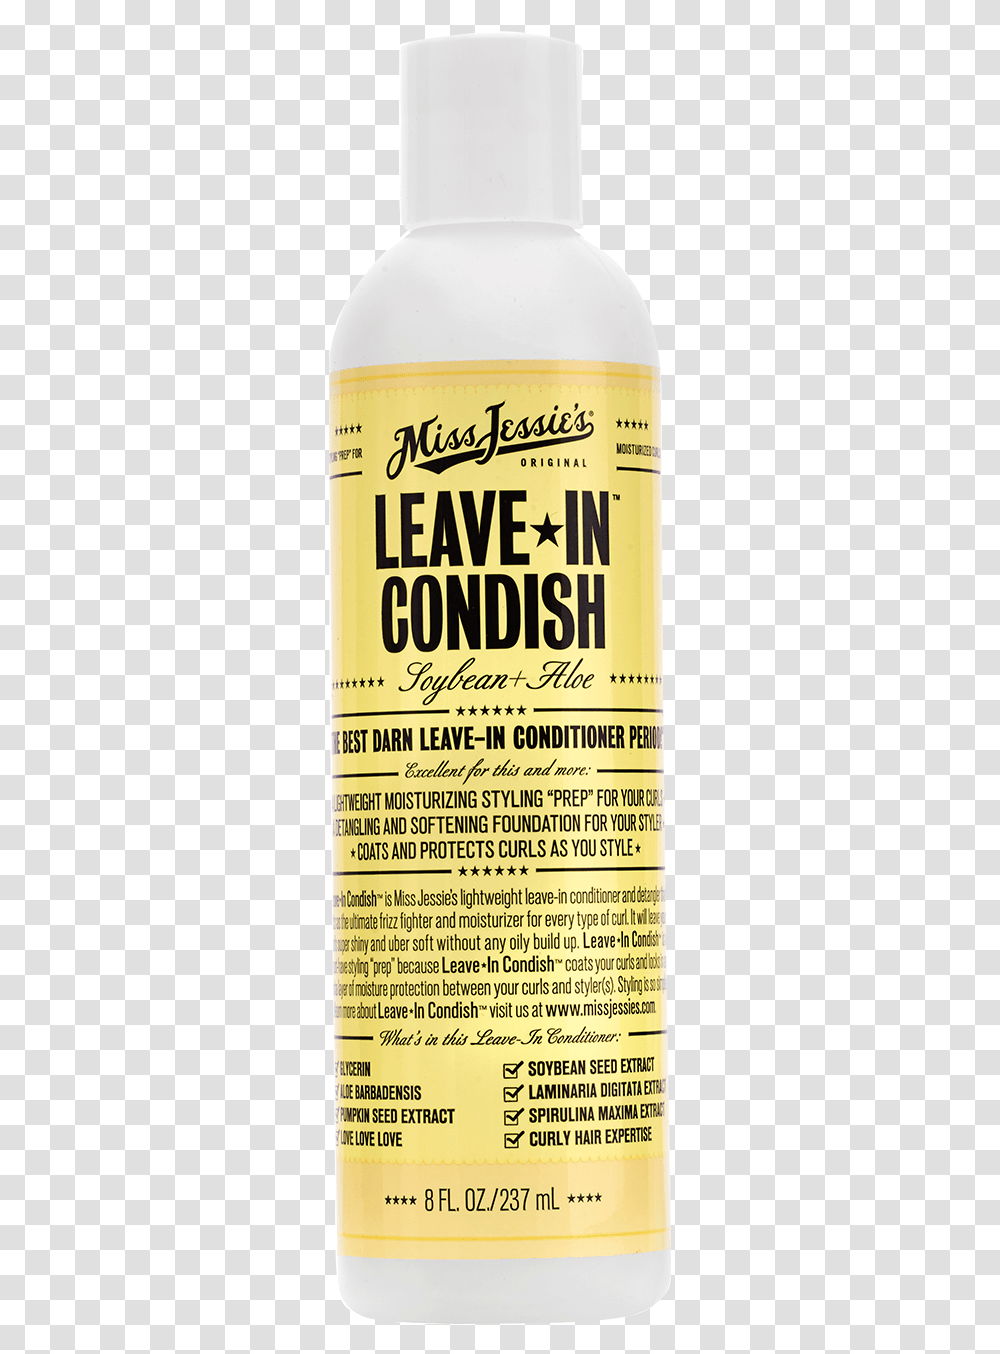 Leave In Condish Lightweight Leave In Conditioner Miss Jessie's Leave In Condish, Liquor, Alcohol, Beverage, Advertisement Transparent Png